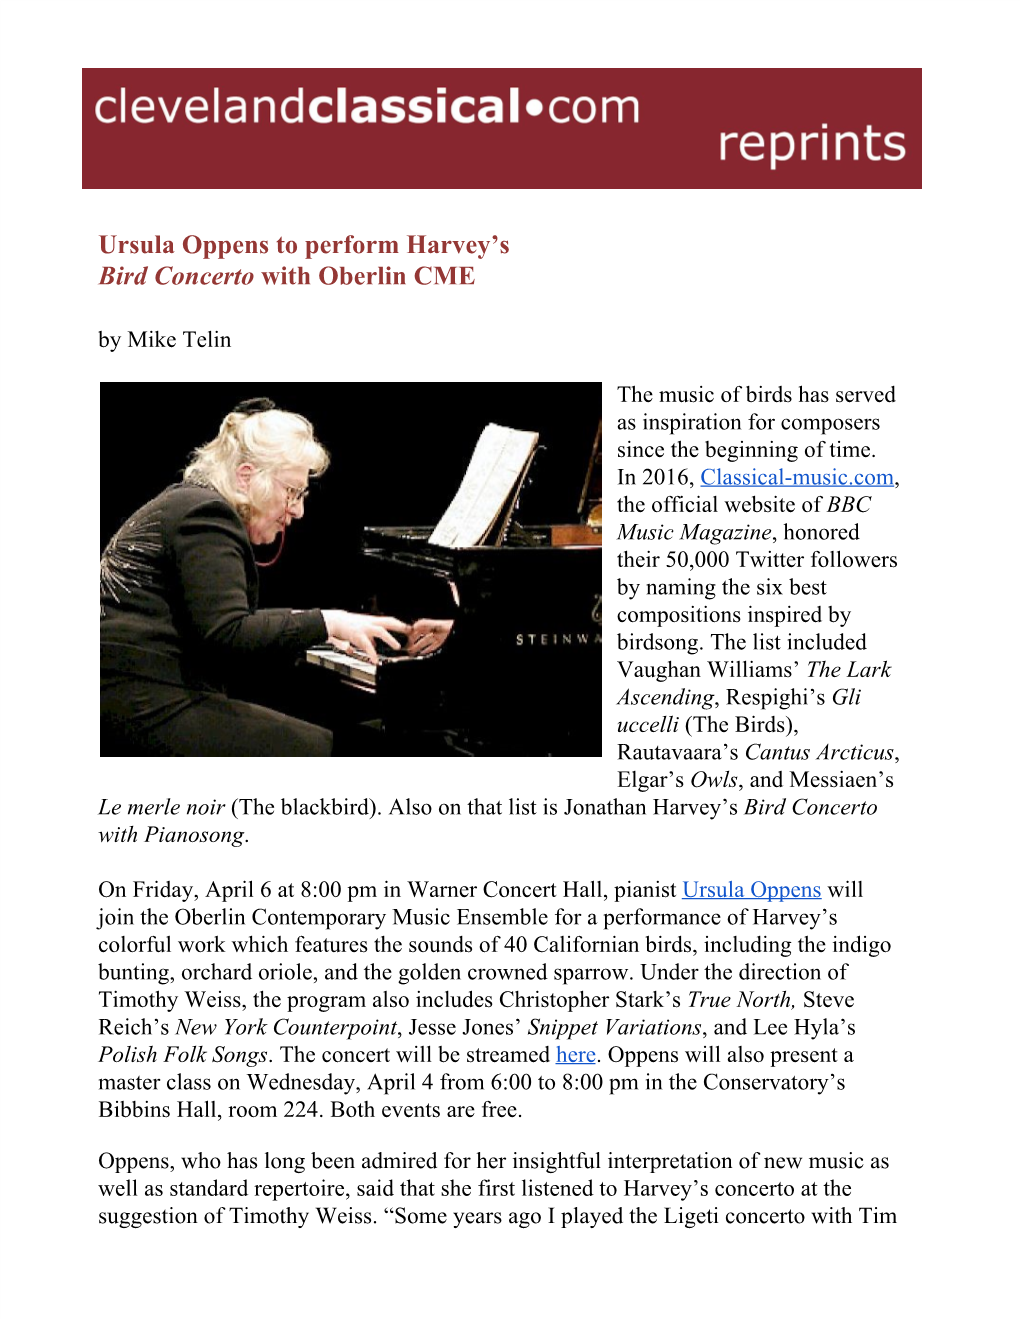 Ursula Oppens to Perform Harvey's Bird Concerto ​With Oberlin